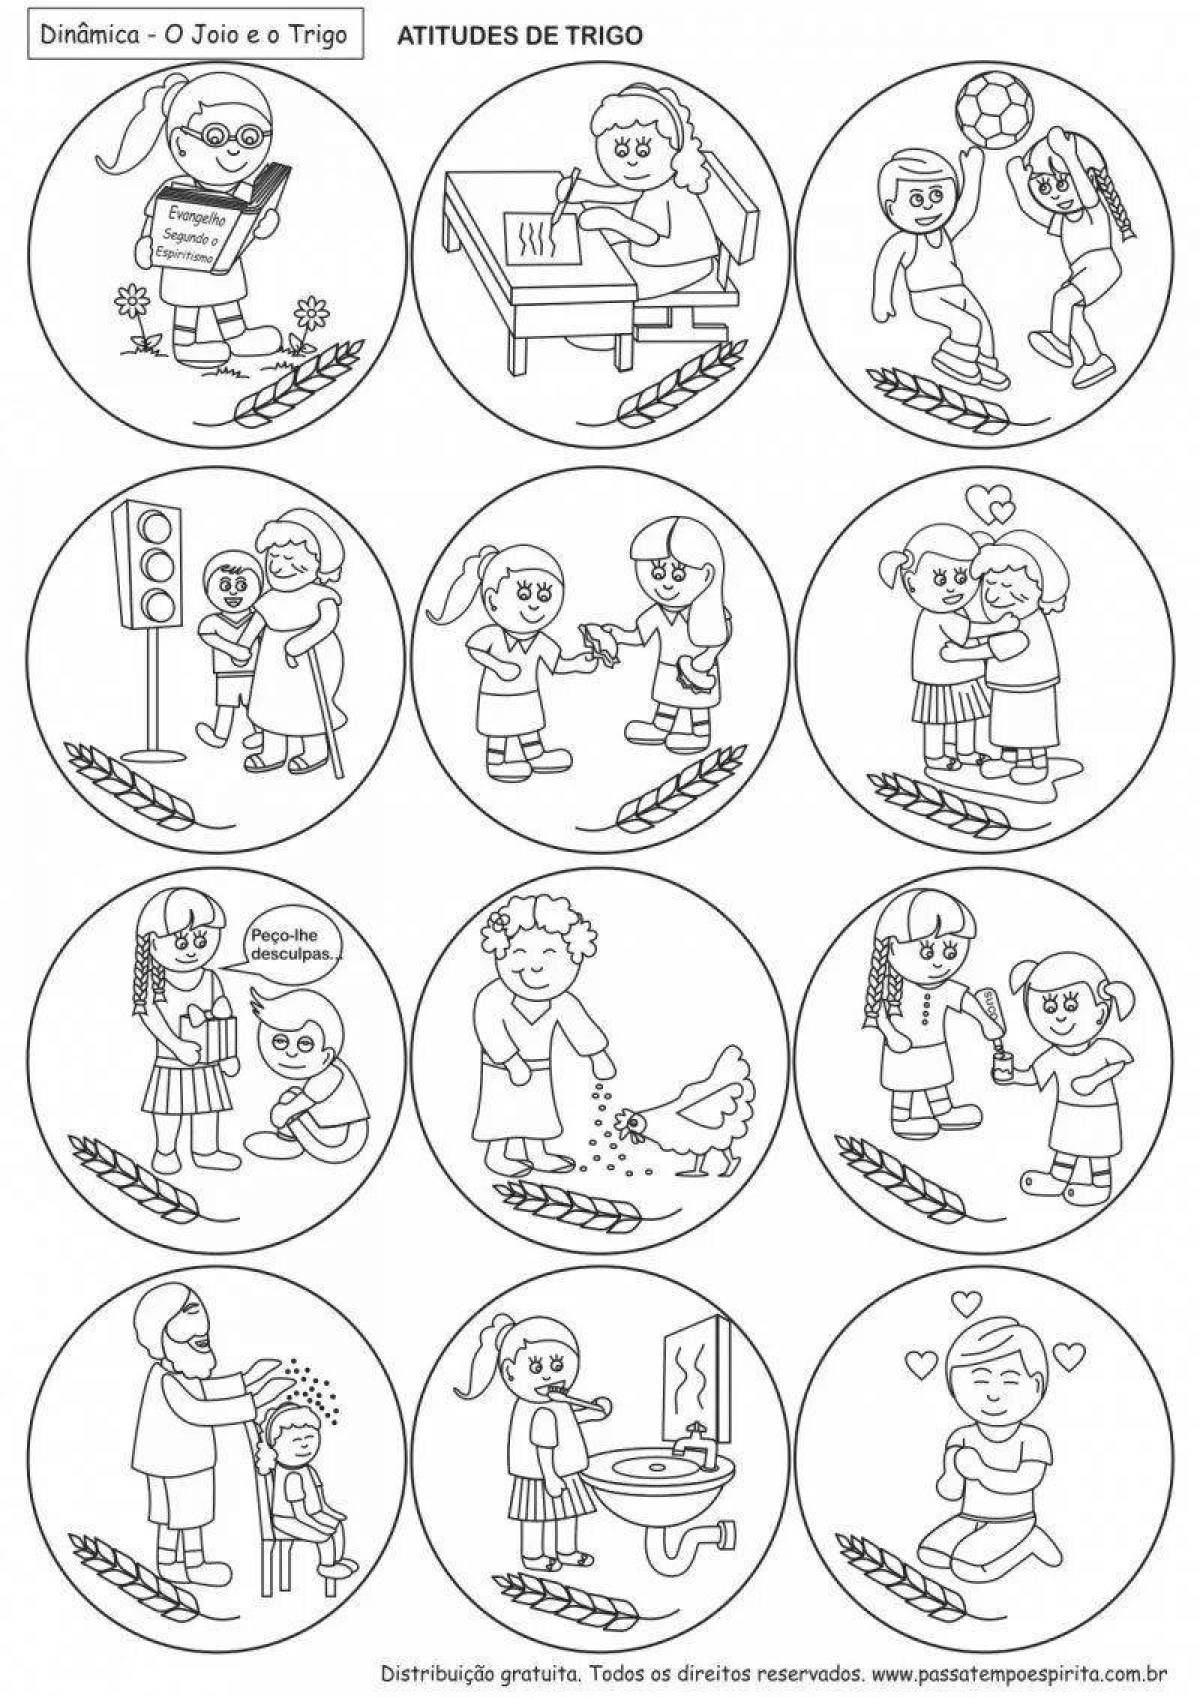 A fun coloring template for elementary school students